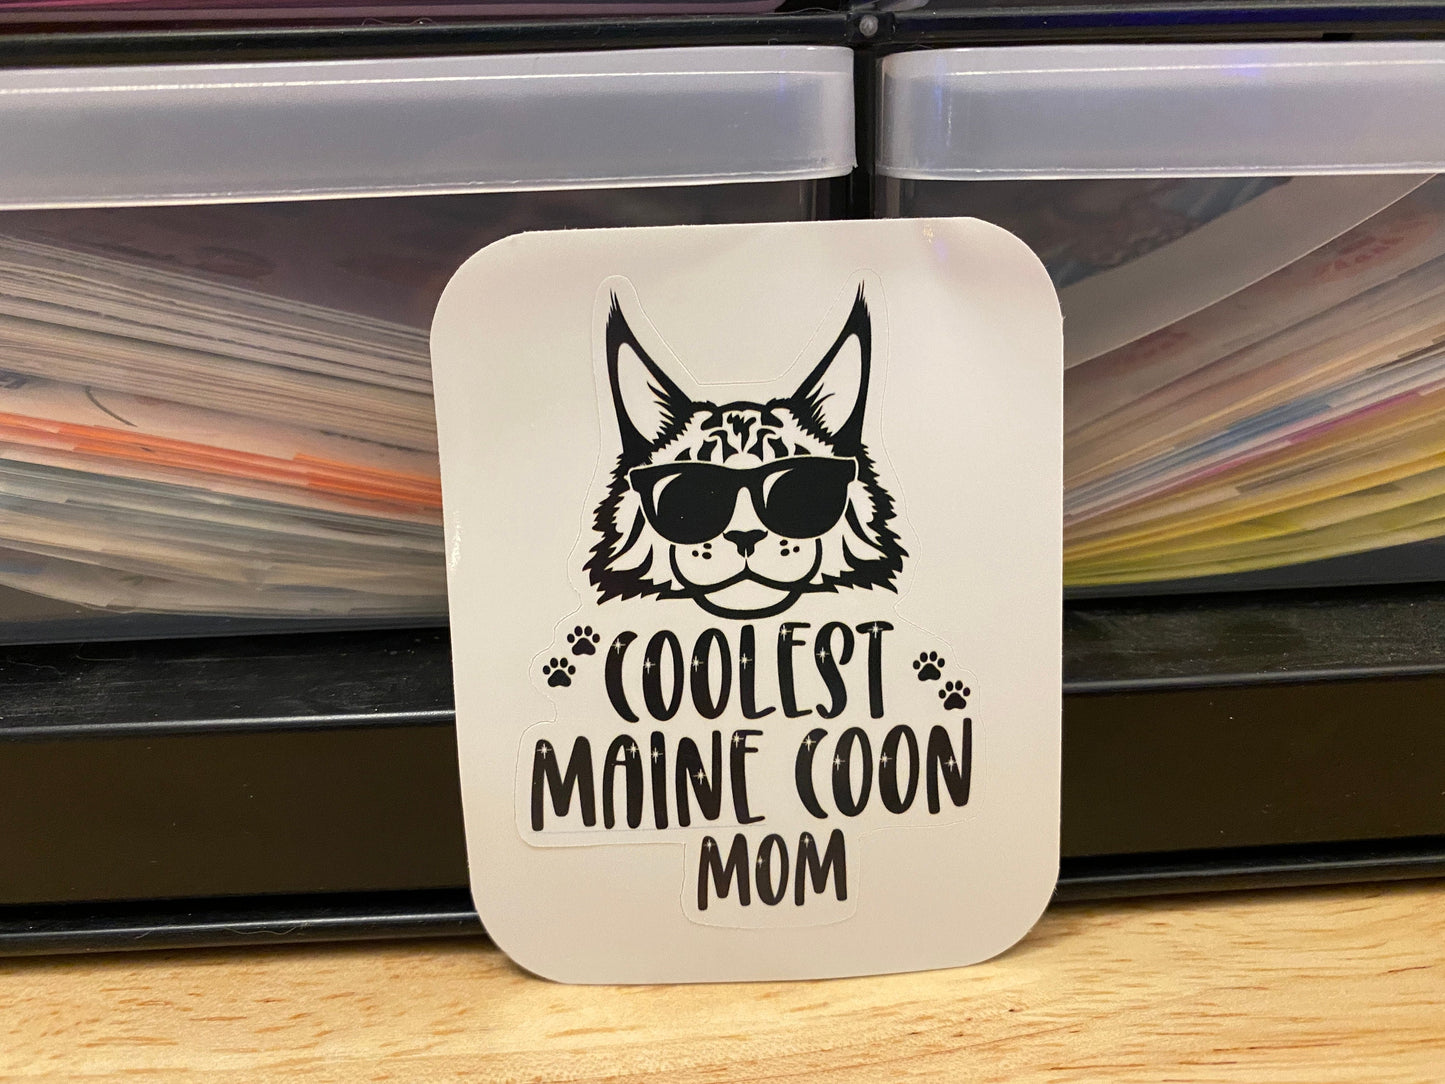 Coolest Maine Coon Mom Sticker, Maine Coon Mom sticker, Maine Coon Sticker, Mom sticker, Cat Mom sticker, Mom cat sticker